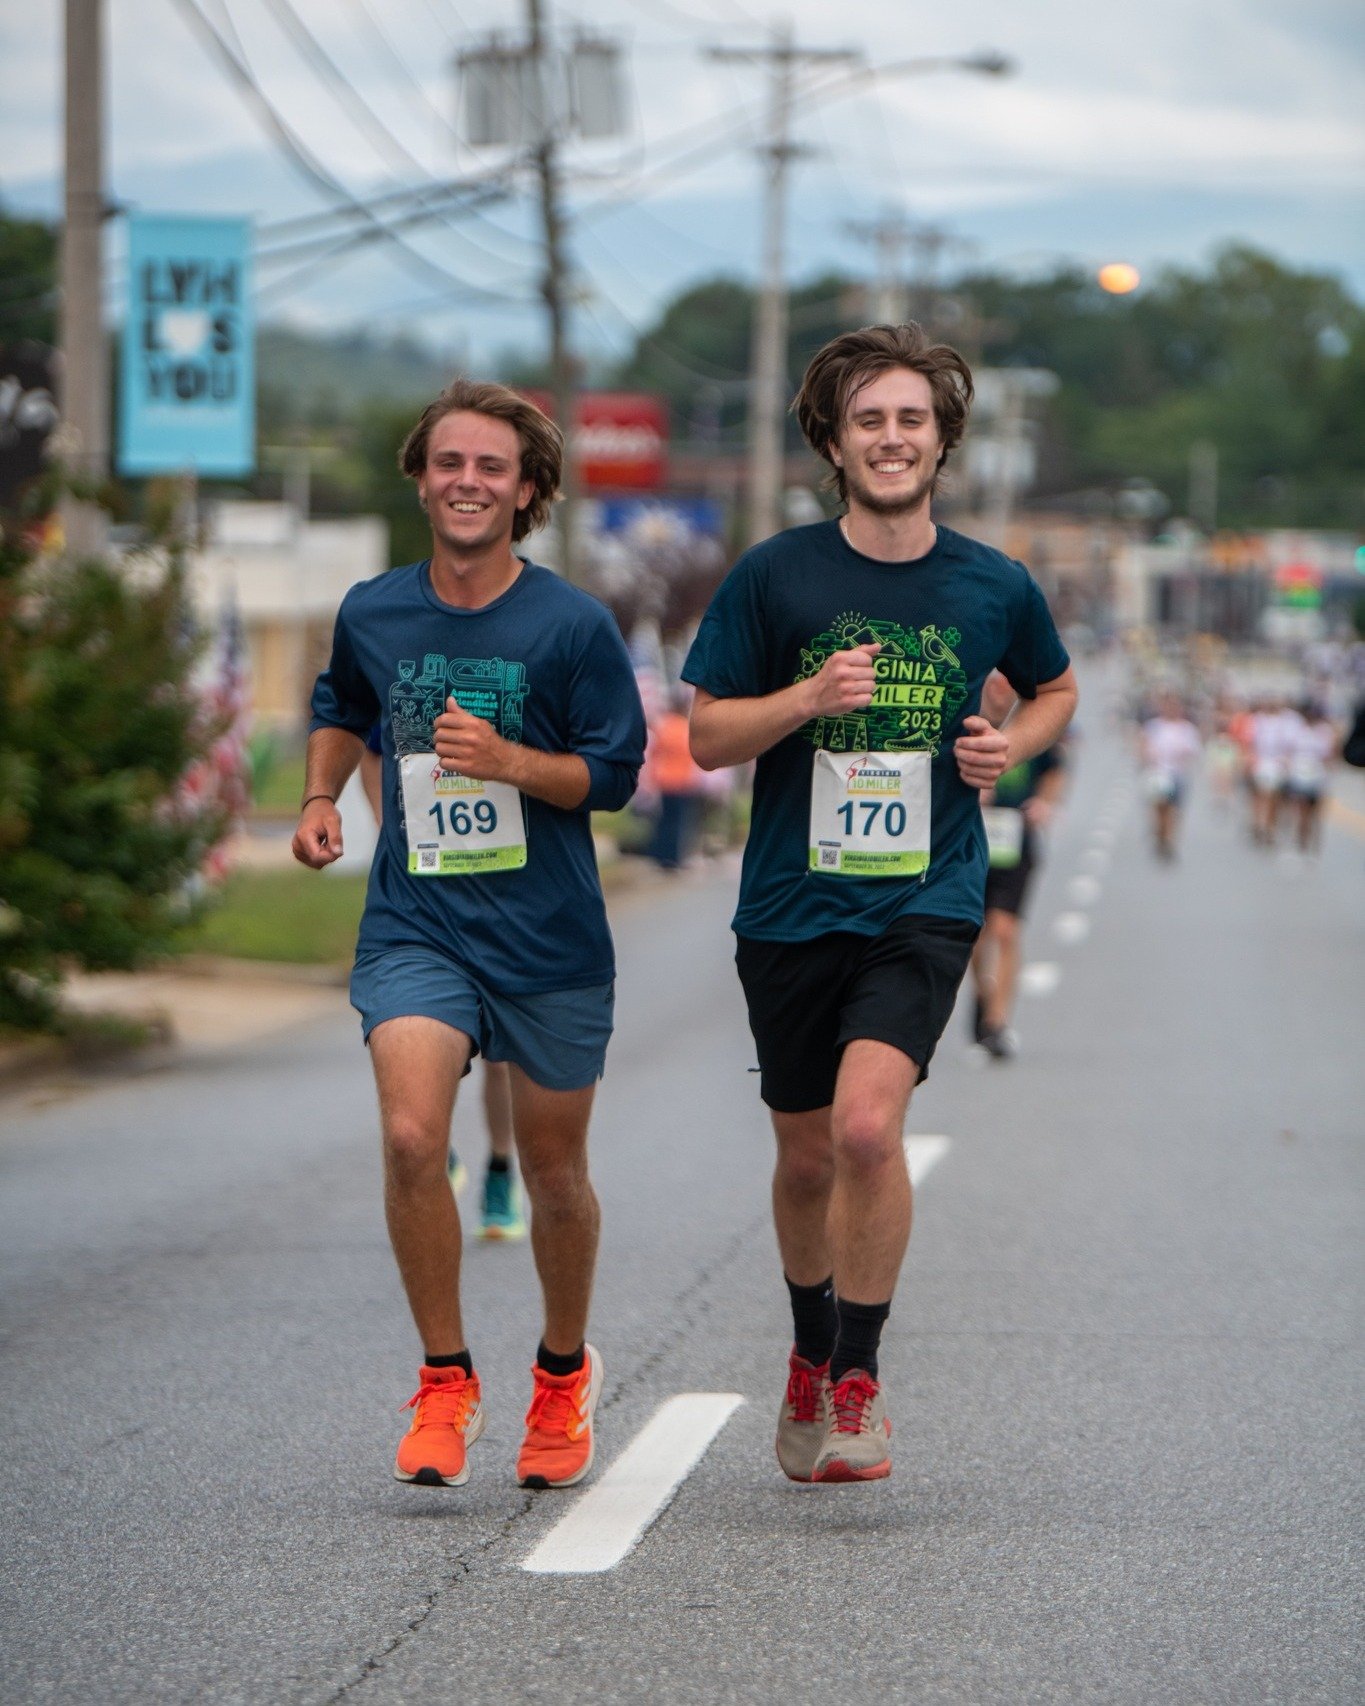 One week left to save up to 45%! 
Prices for the Virginia 10 Miler (on Sept. 28) increase after next Tuesday, April 30. 

Register now to save (link in bio).